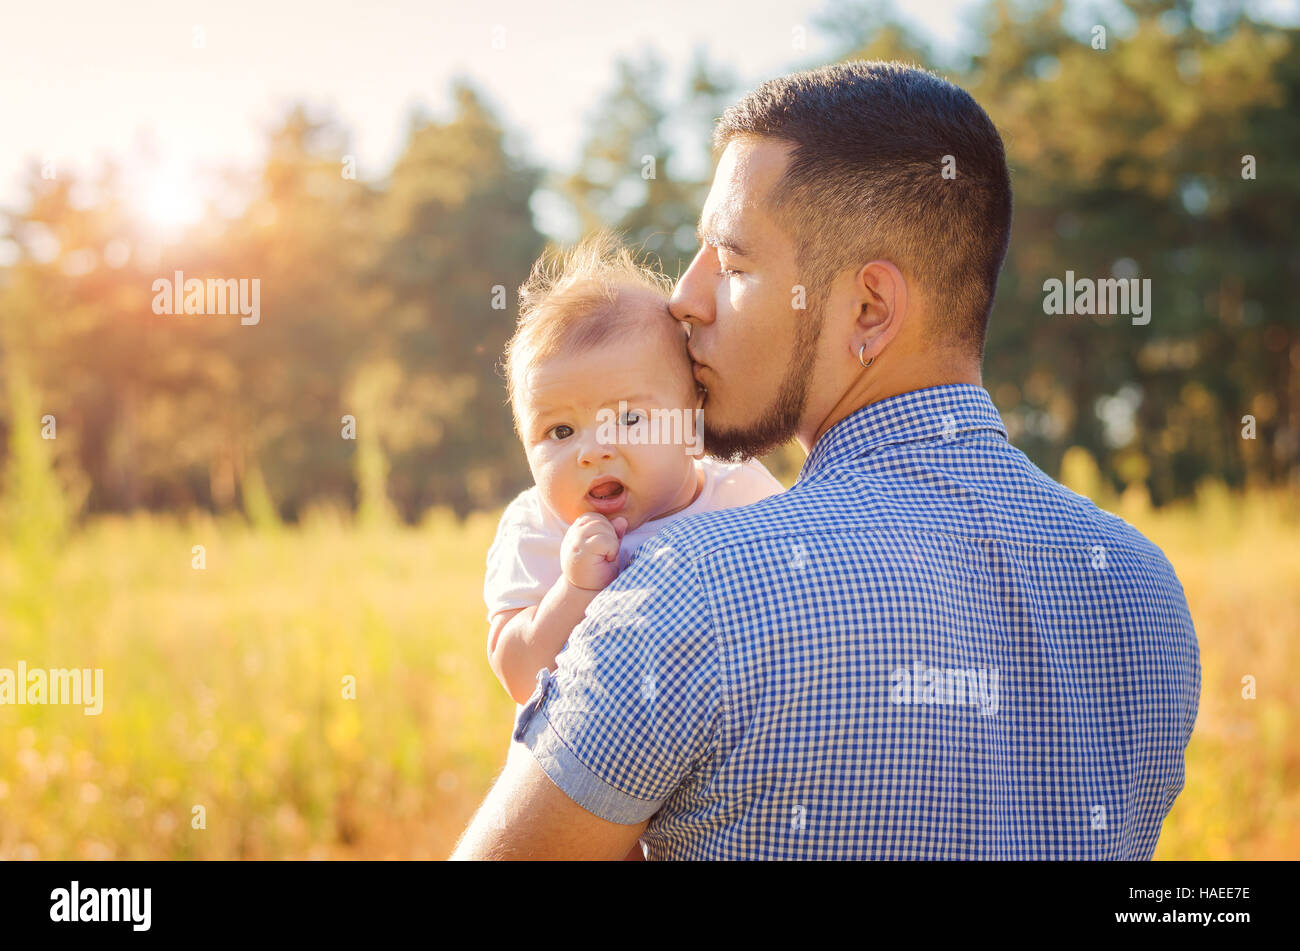 Young daddy kissing a baby. Walk autumn evening outdoors. Stock Photo